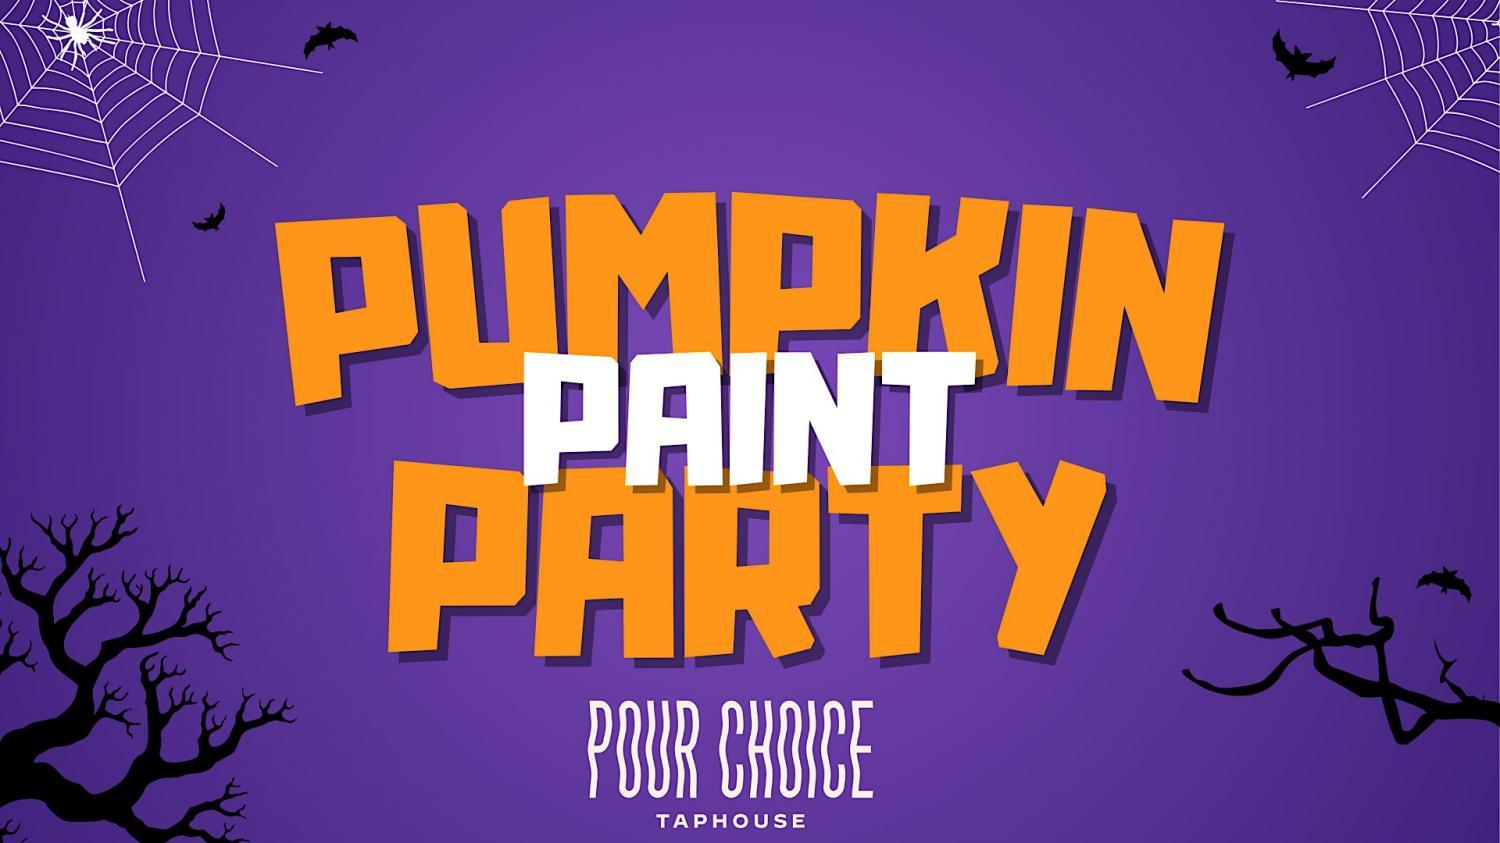 Pumpkin Painting Party - Pour Choice Taphouse
Wed Oct 19, 7:00 PM - Wed Oct 19, 8:30 PM